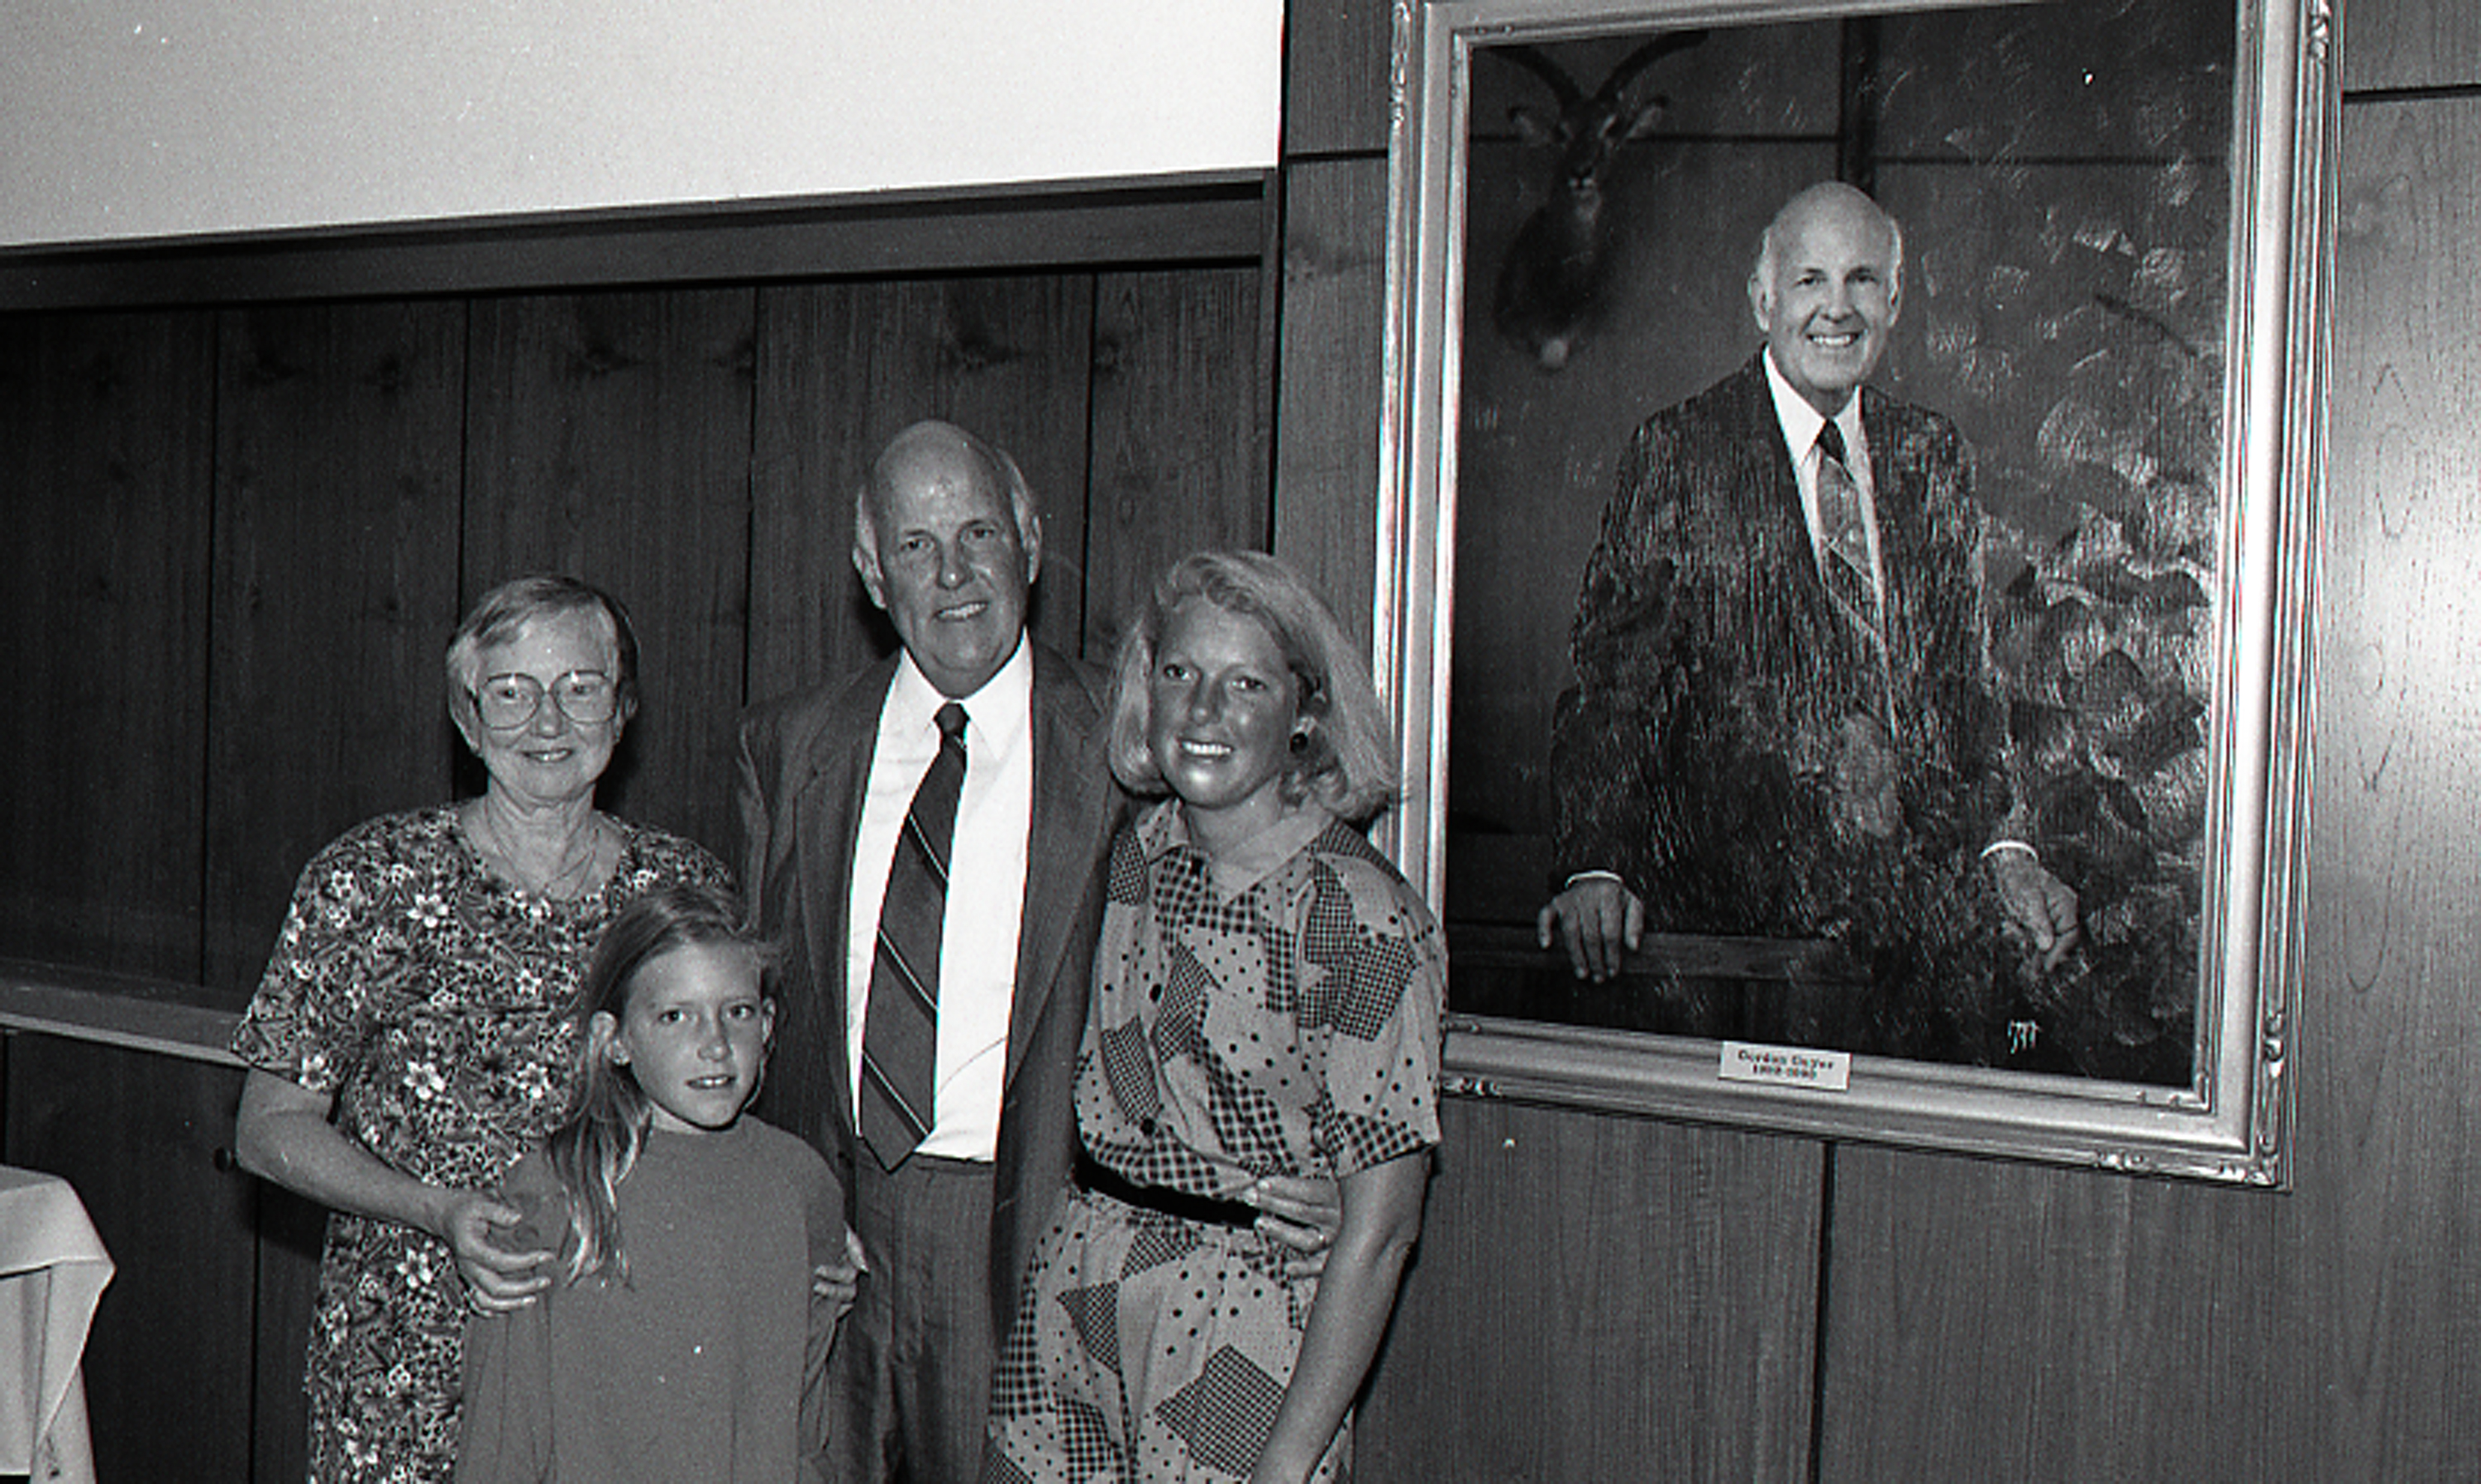 Guyer poses with family in front of his portrait painting at the John A. Hannah administration building at MSU. Photo courtesy of MSU Archives.